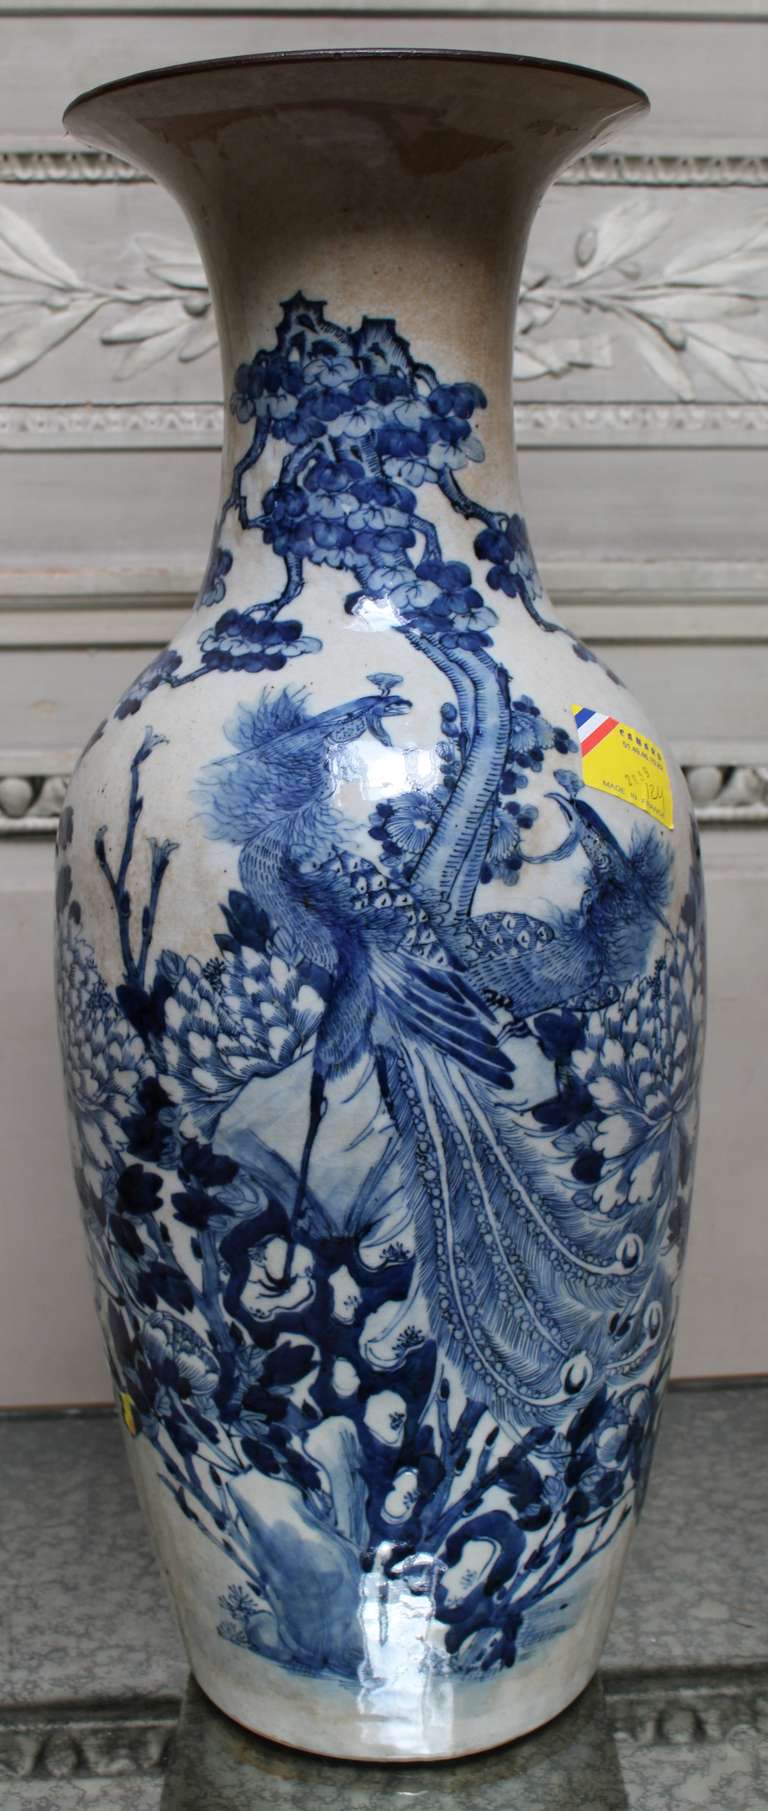 A Blue and White Chinese Vase with Peacock and Floral Design